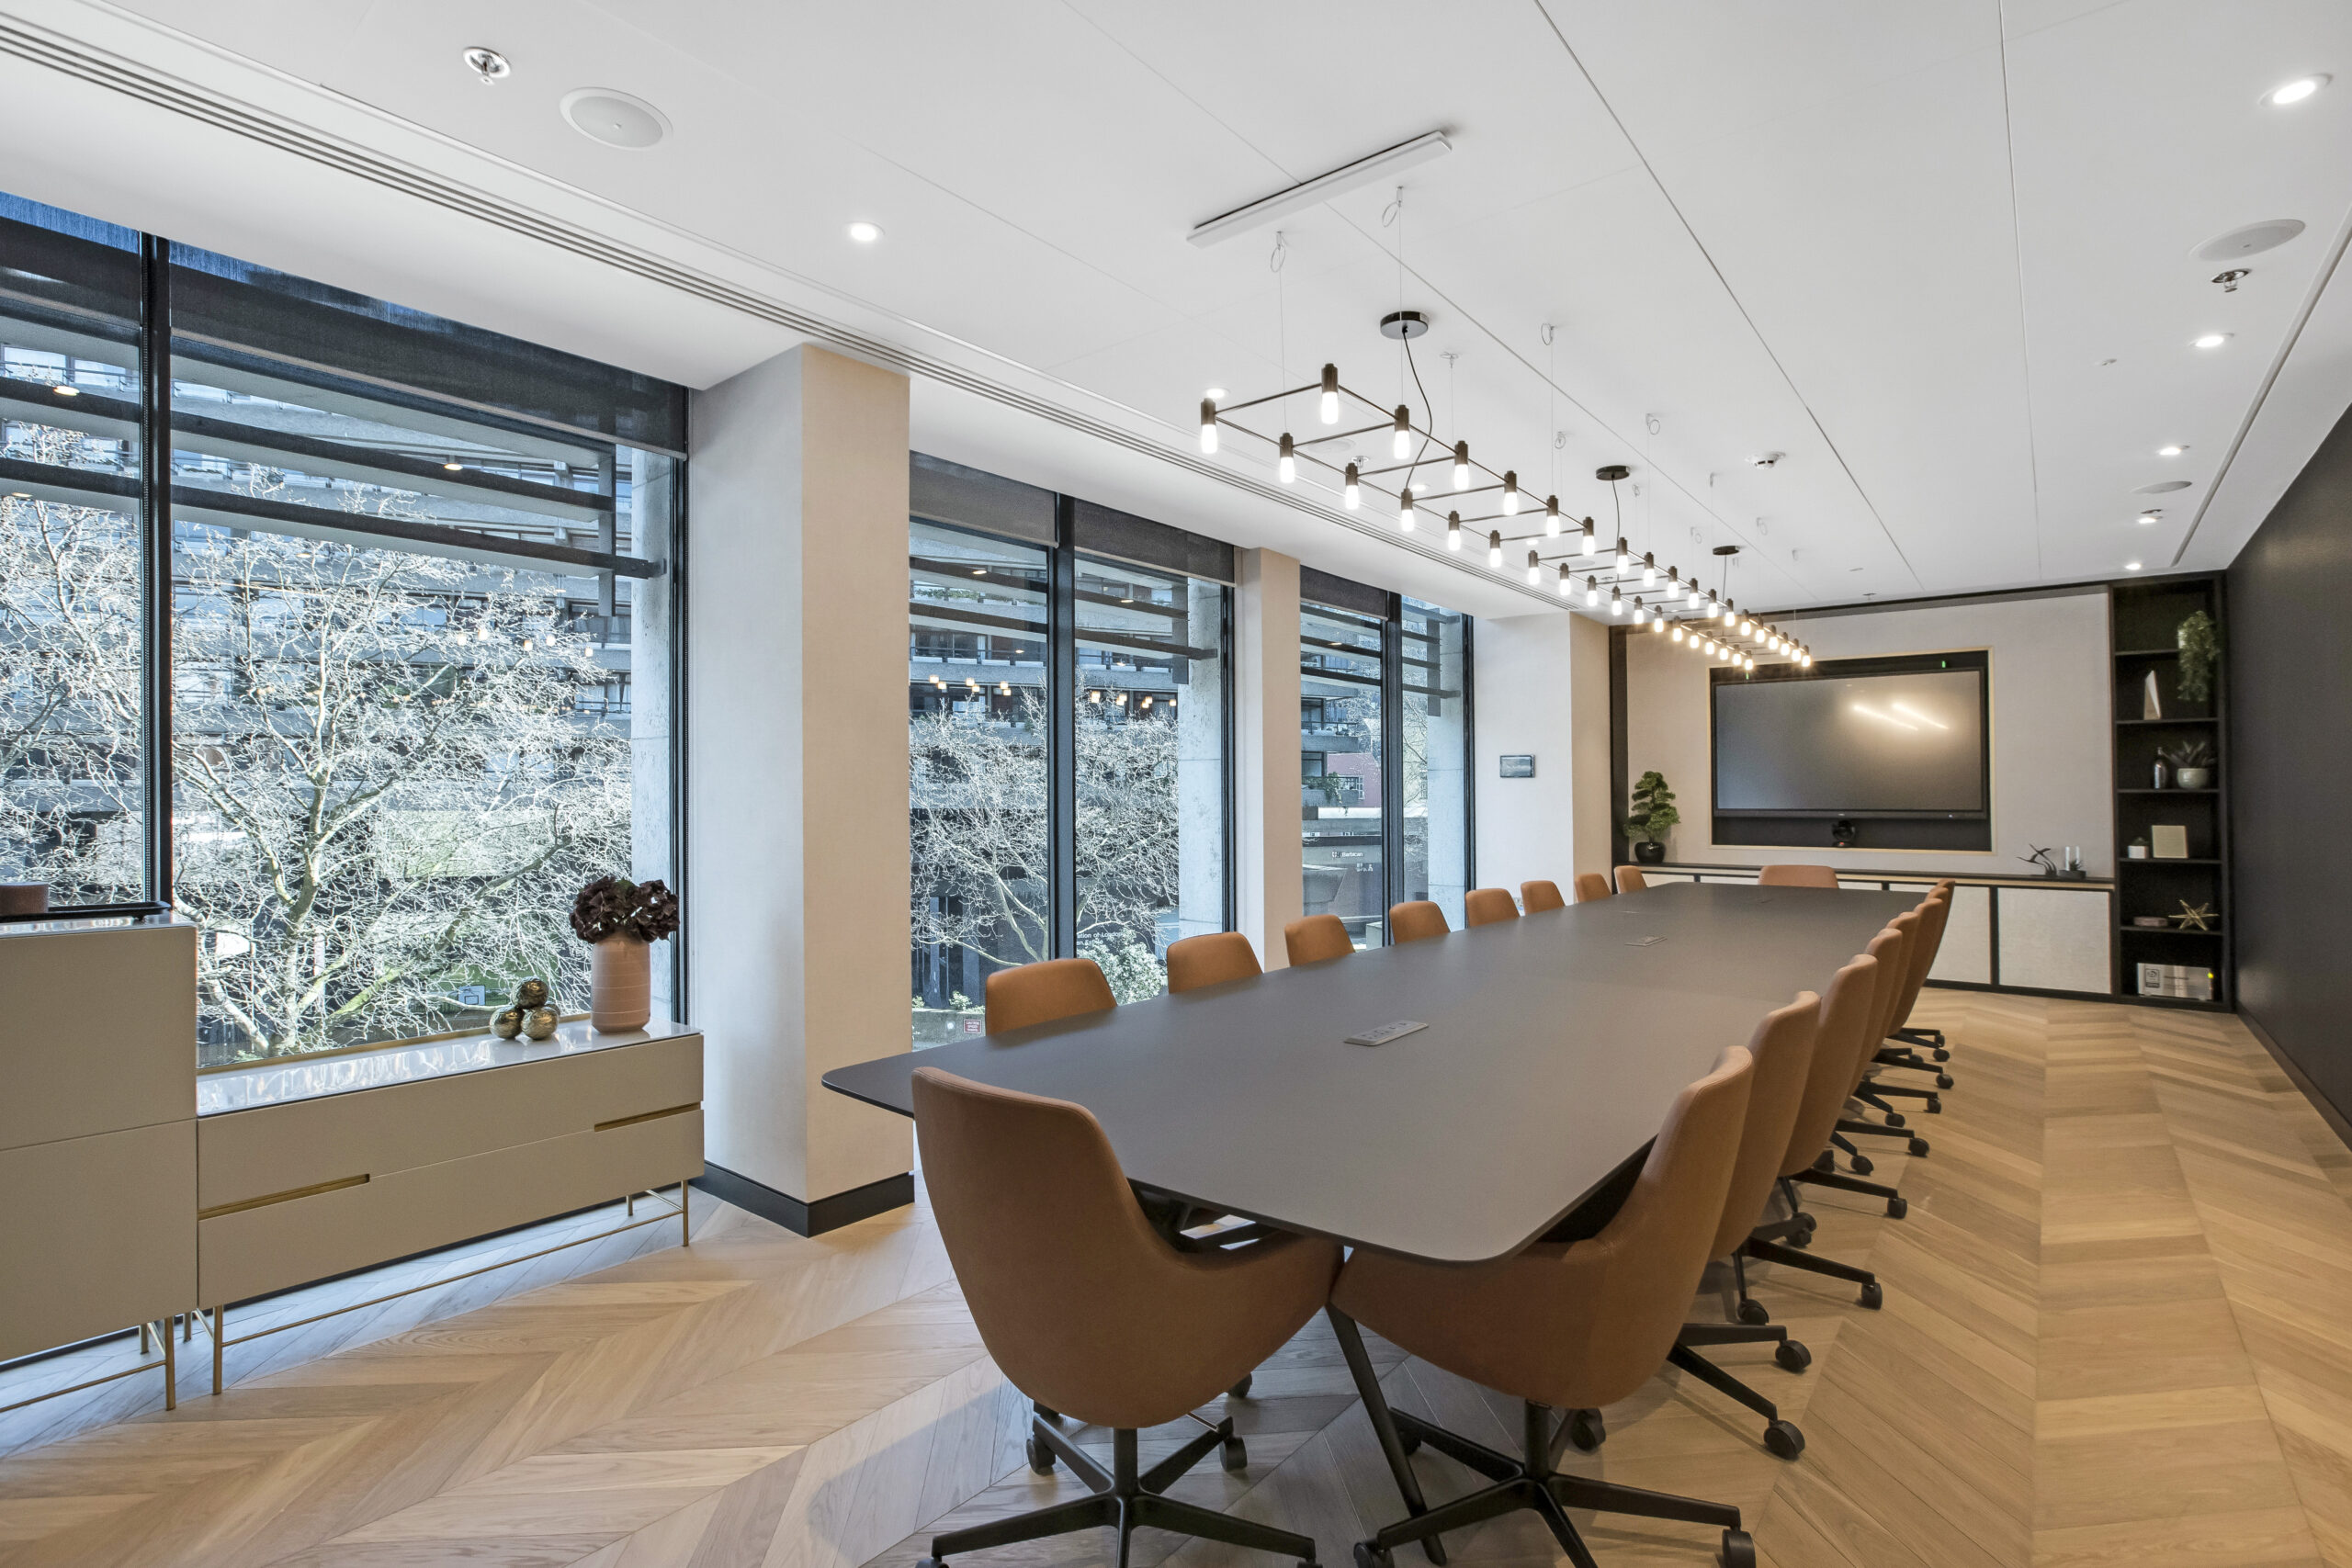 User-centered corporate video conference space | Byond Group